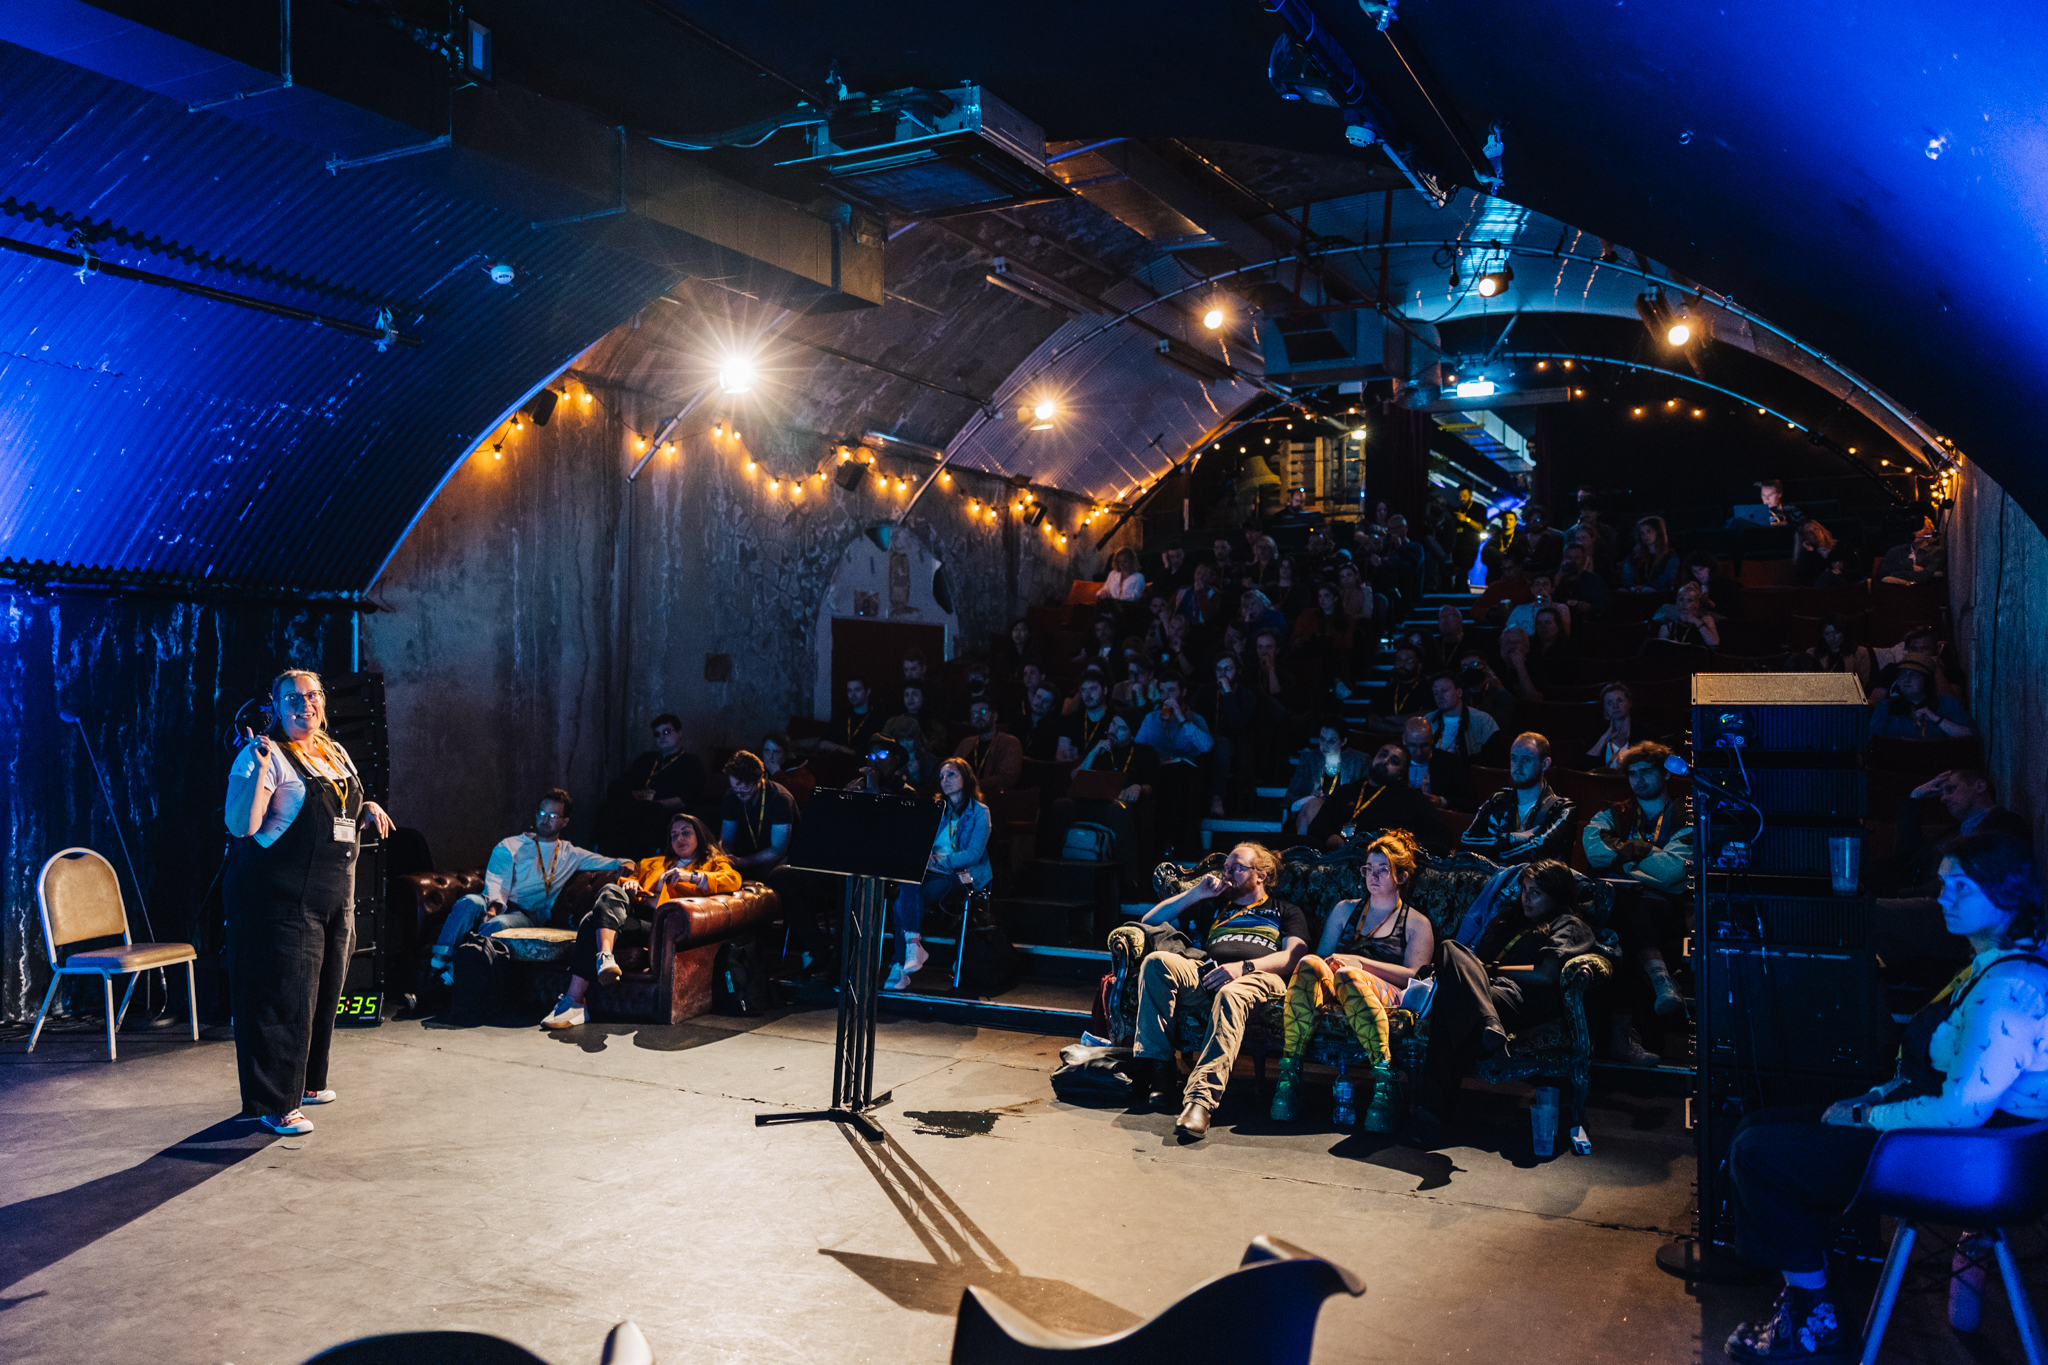 Immersive Experience Network event in an underground theatre space.